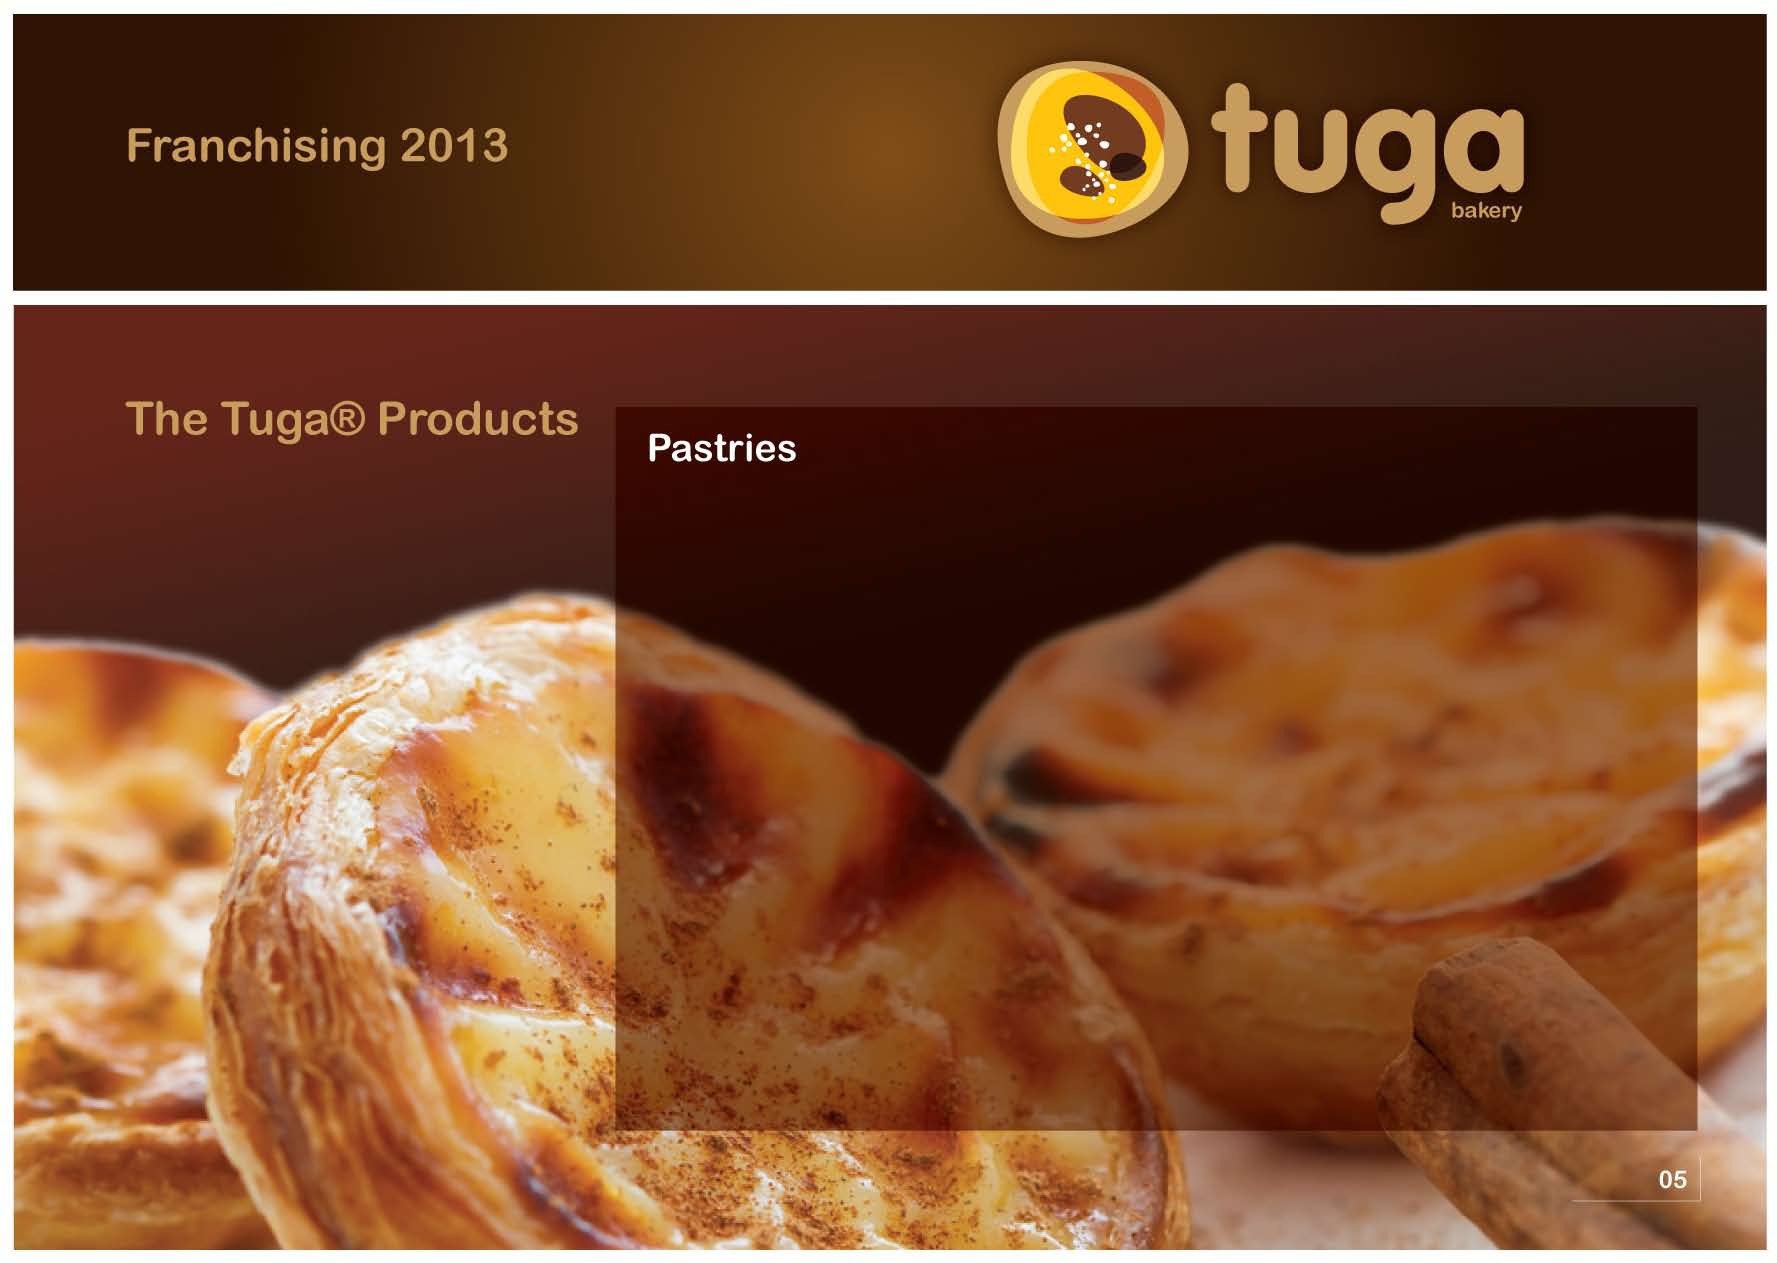 TUGA'S PRODUCTS